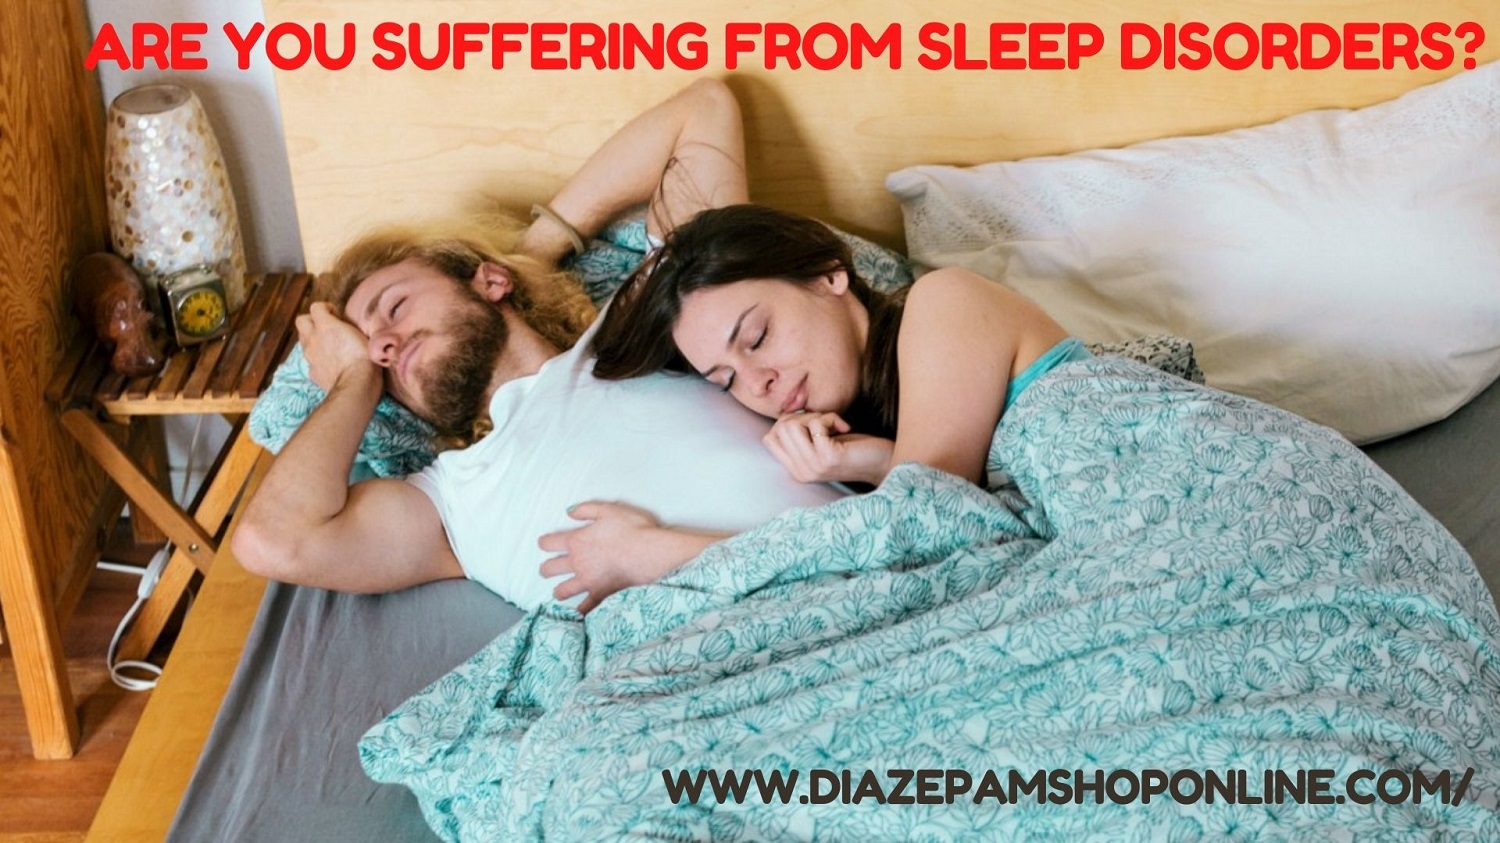 Are You Suffering From Sleep Disorders - Buy Zopiclone tablets